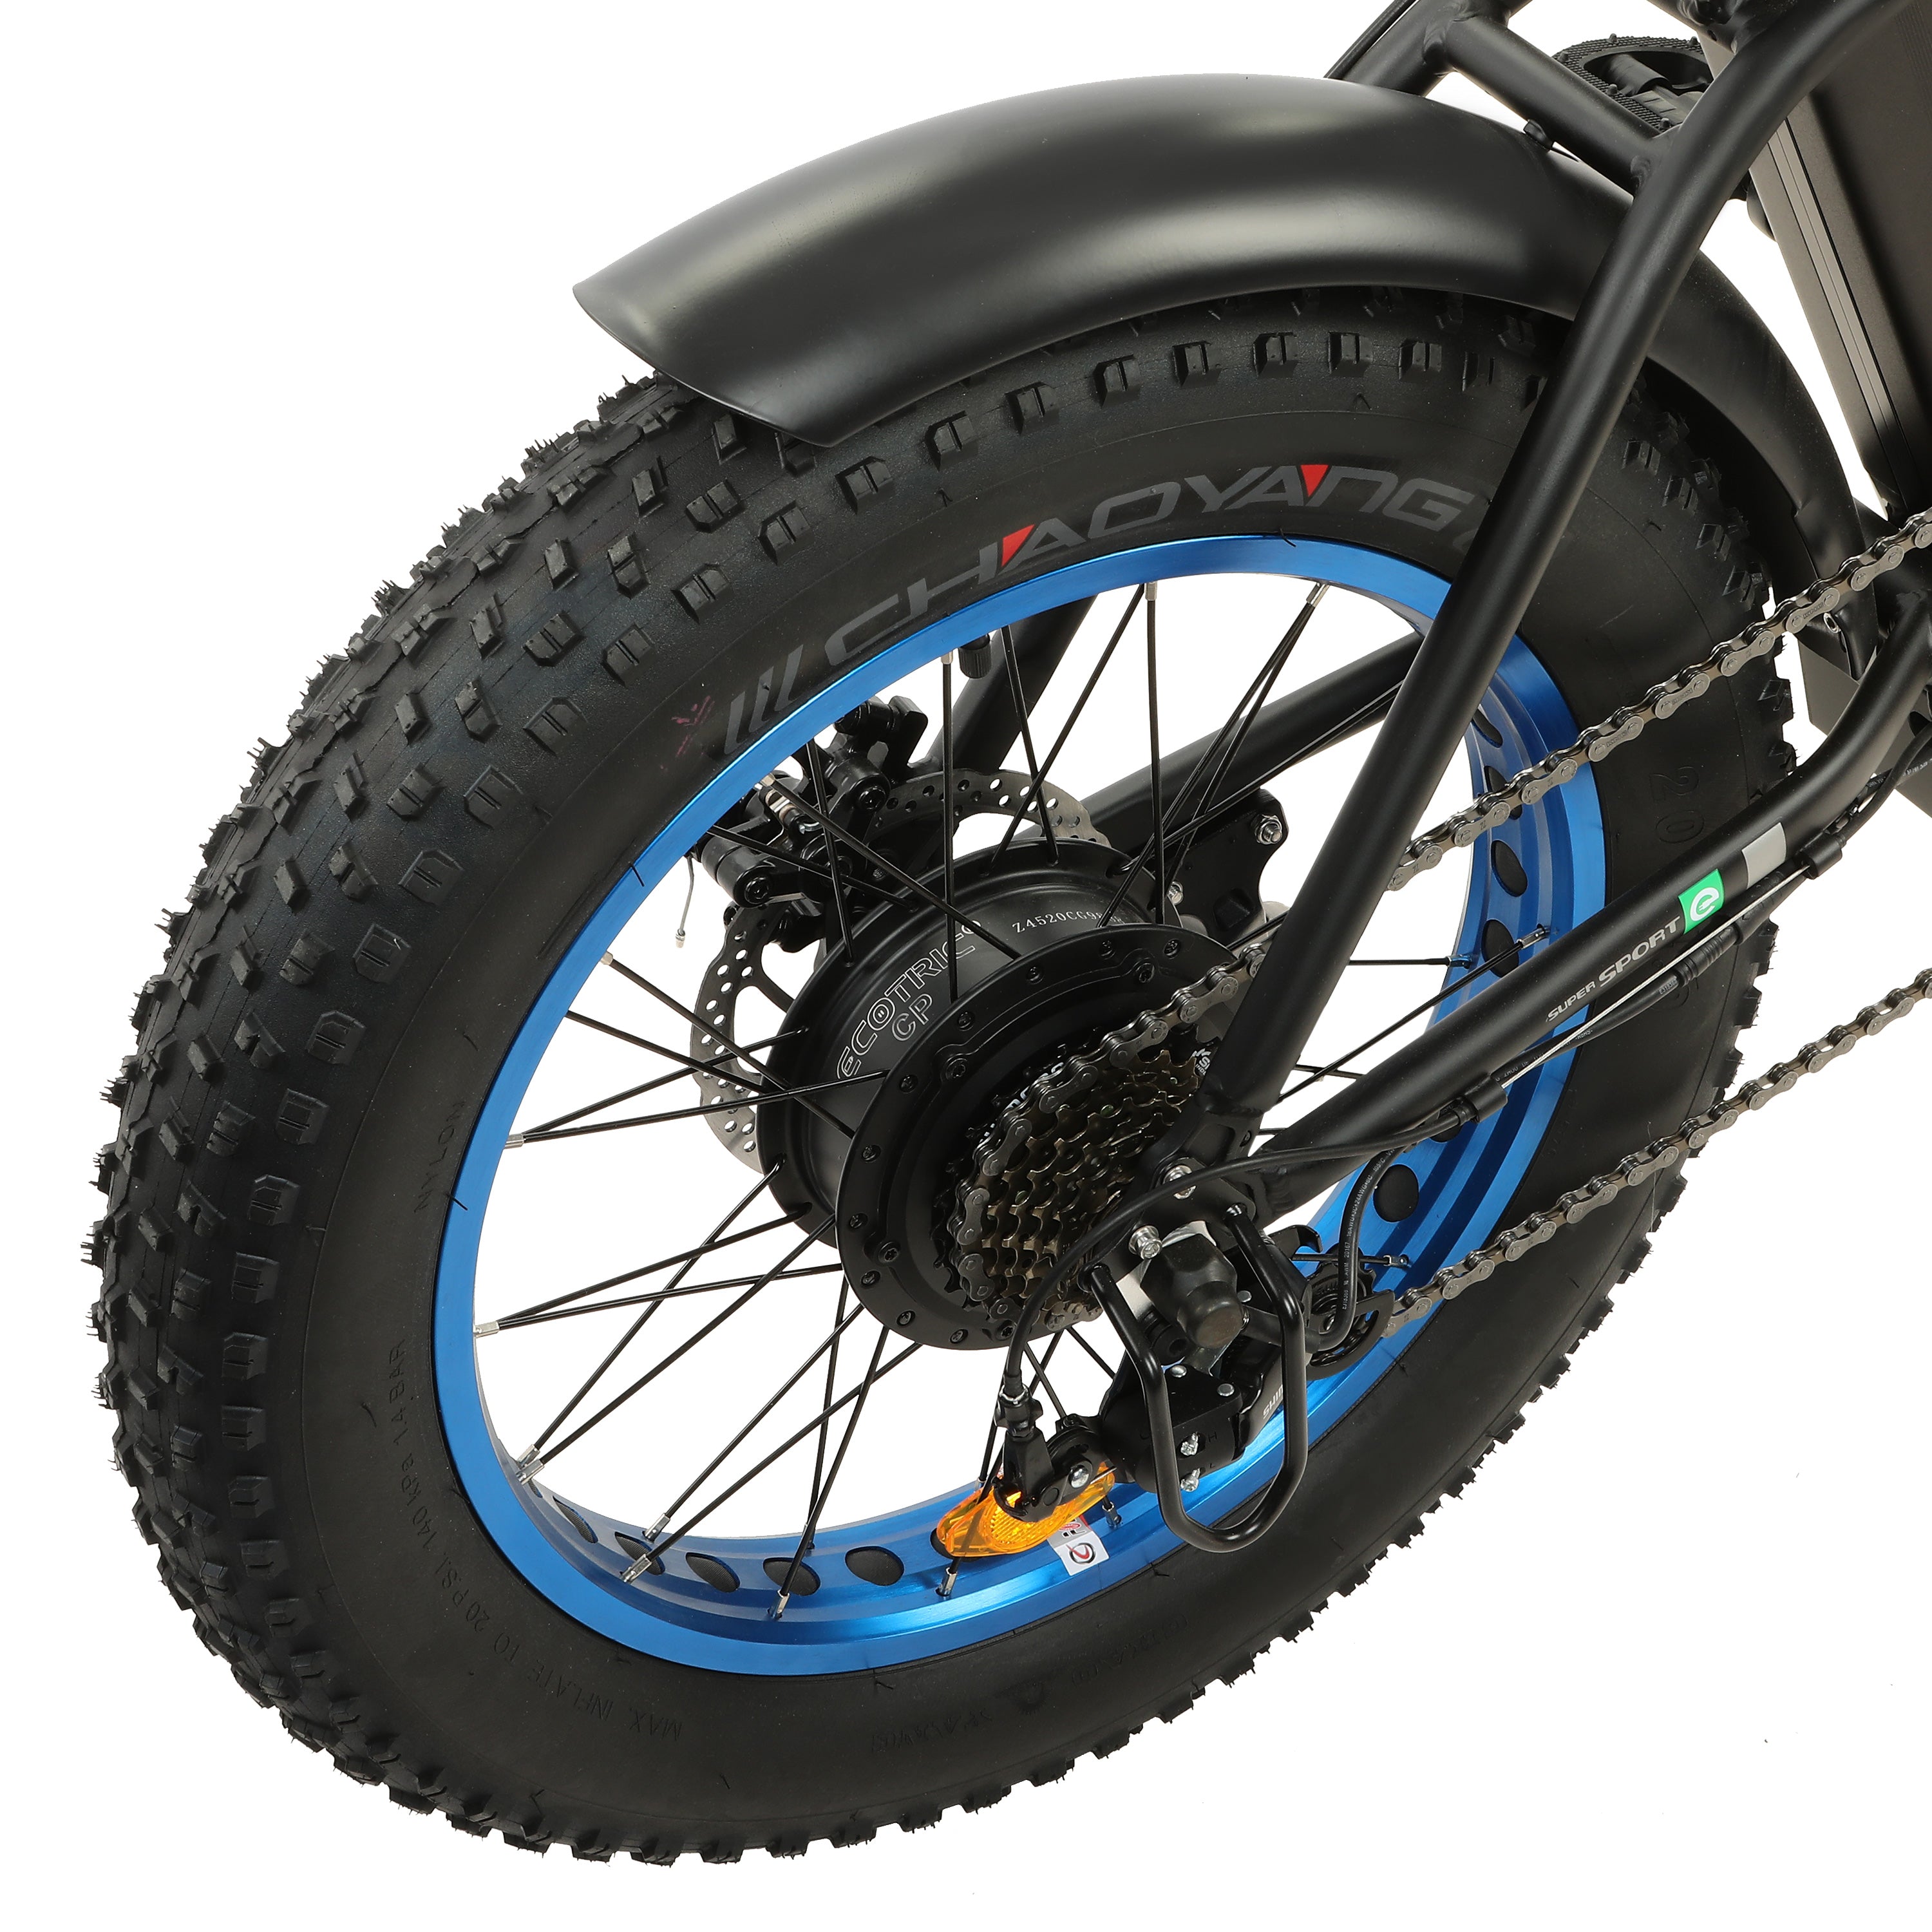 Ecotric 48V Fat Tire Portable And Folding Electric Bike With Lcd Display-Black And Blue